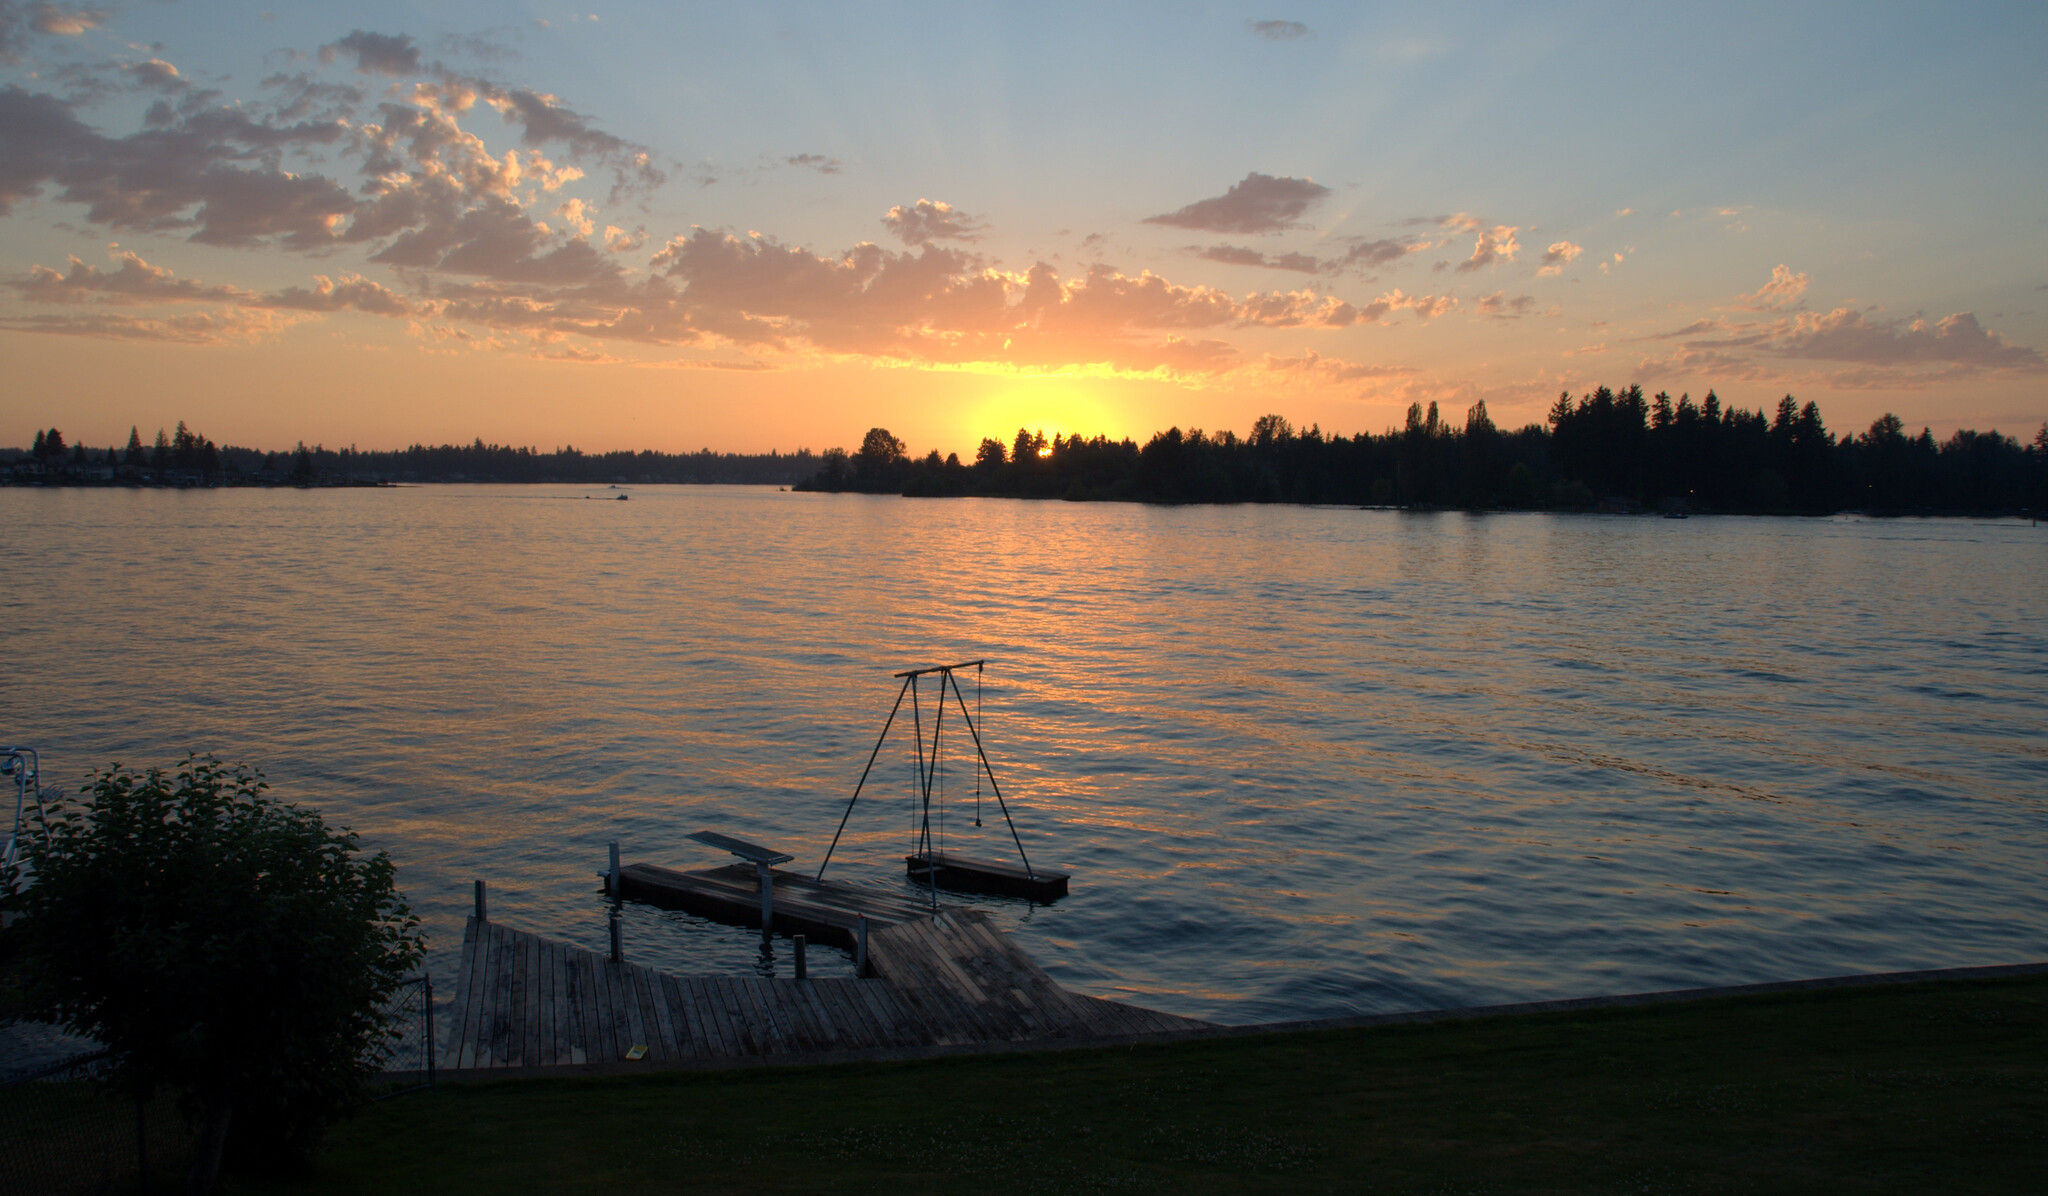 Bonney Lake has some great views of Mt. Rainier. In August, experience the Washington Midsummer Renaissance Faire and partake in the Viking drum circle